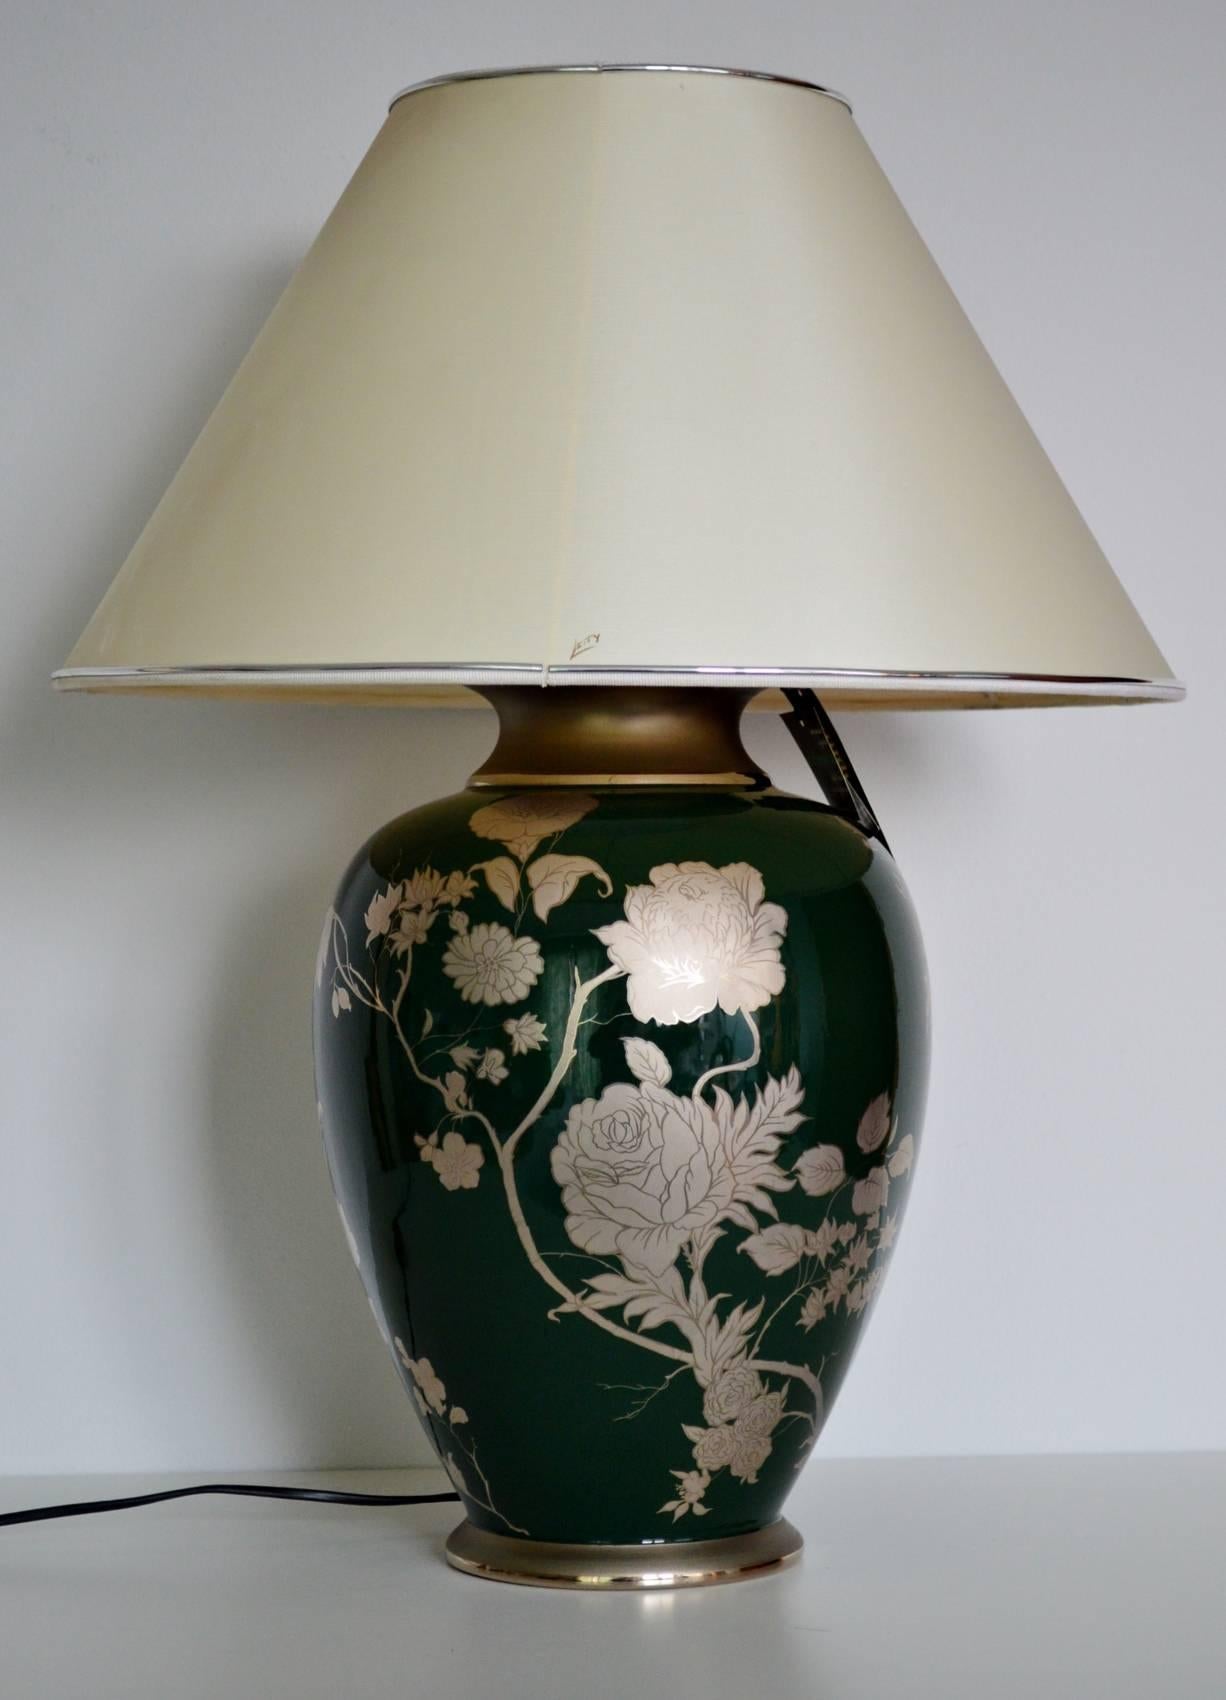 French Maison Le Dauphin Ceramic Table Lamp Silver Green, Signed, France Regency, 1970